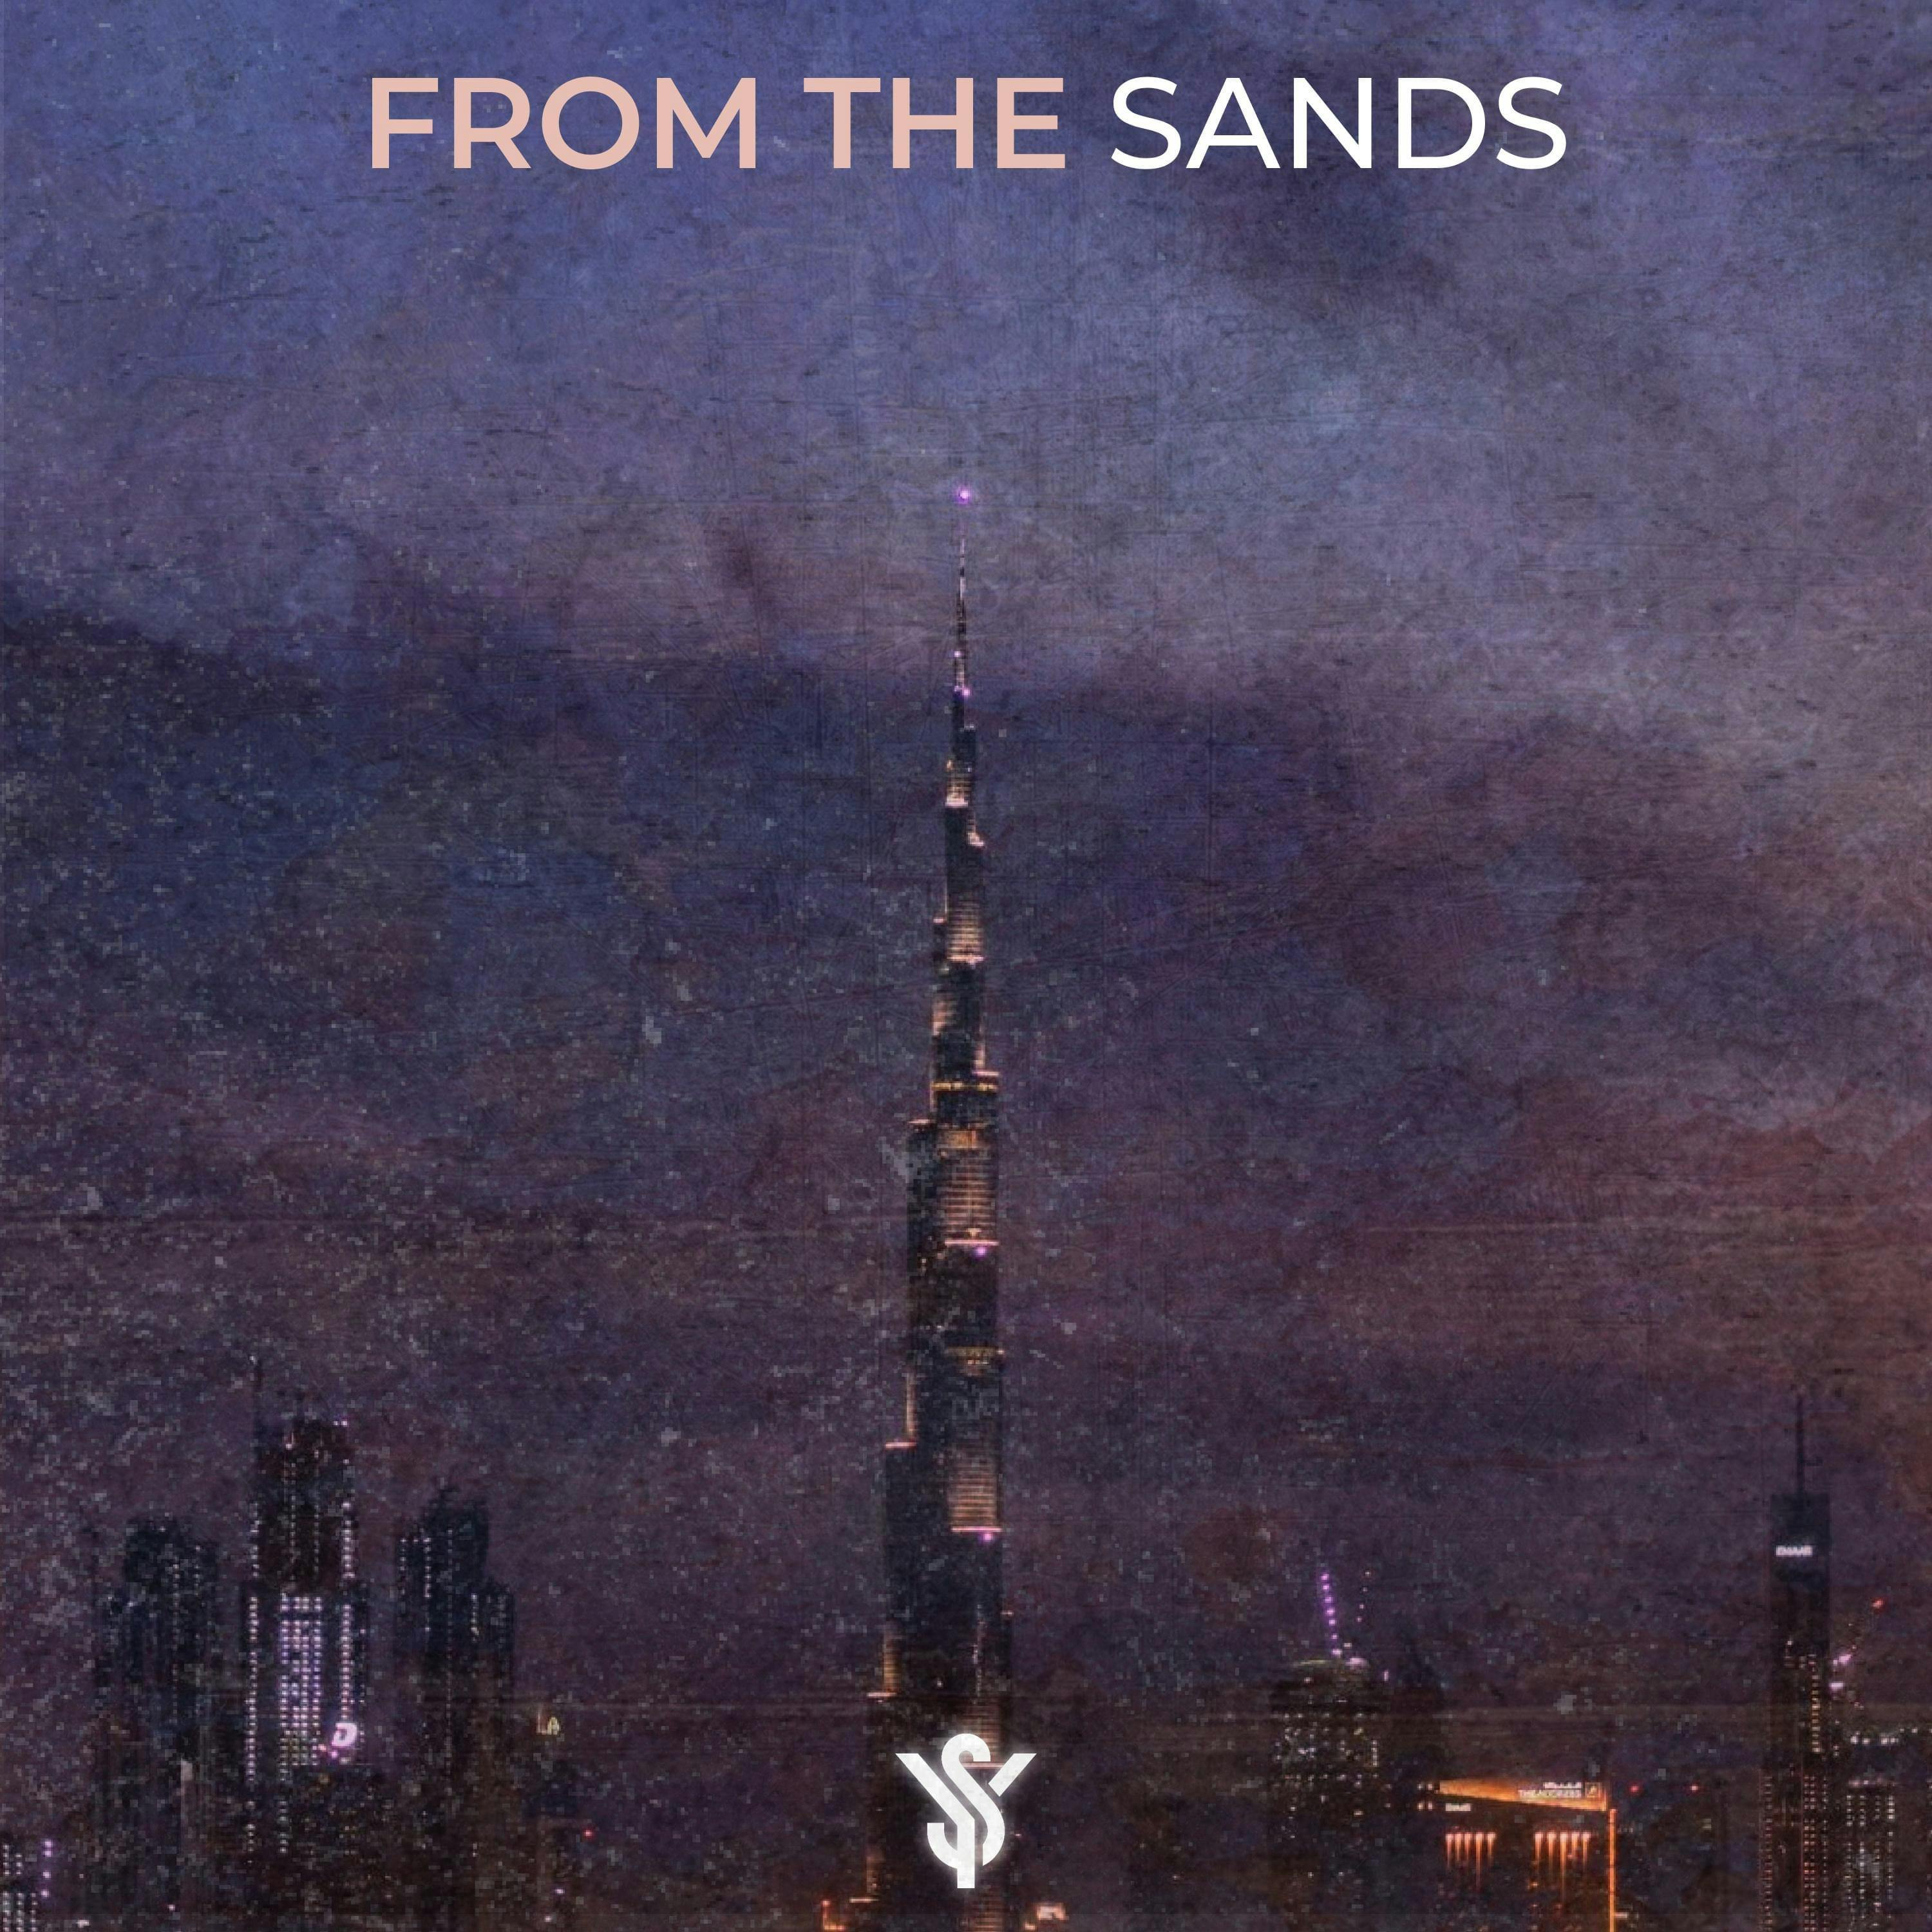 Cover art for Shak's song: From The Sands